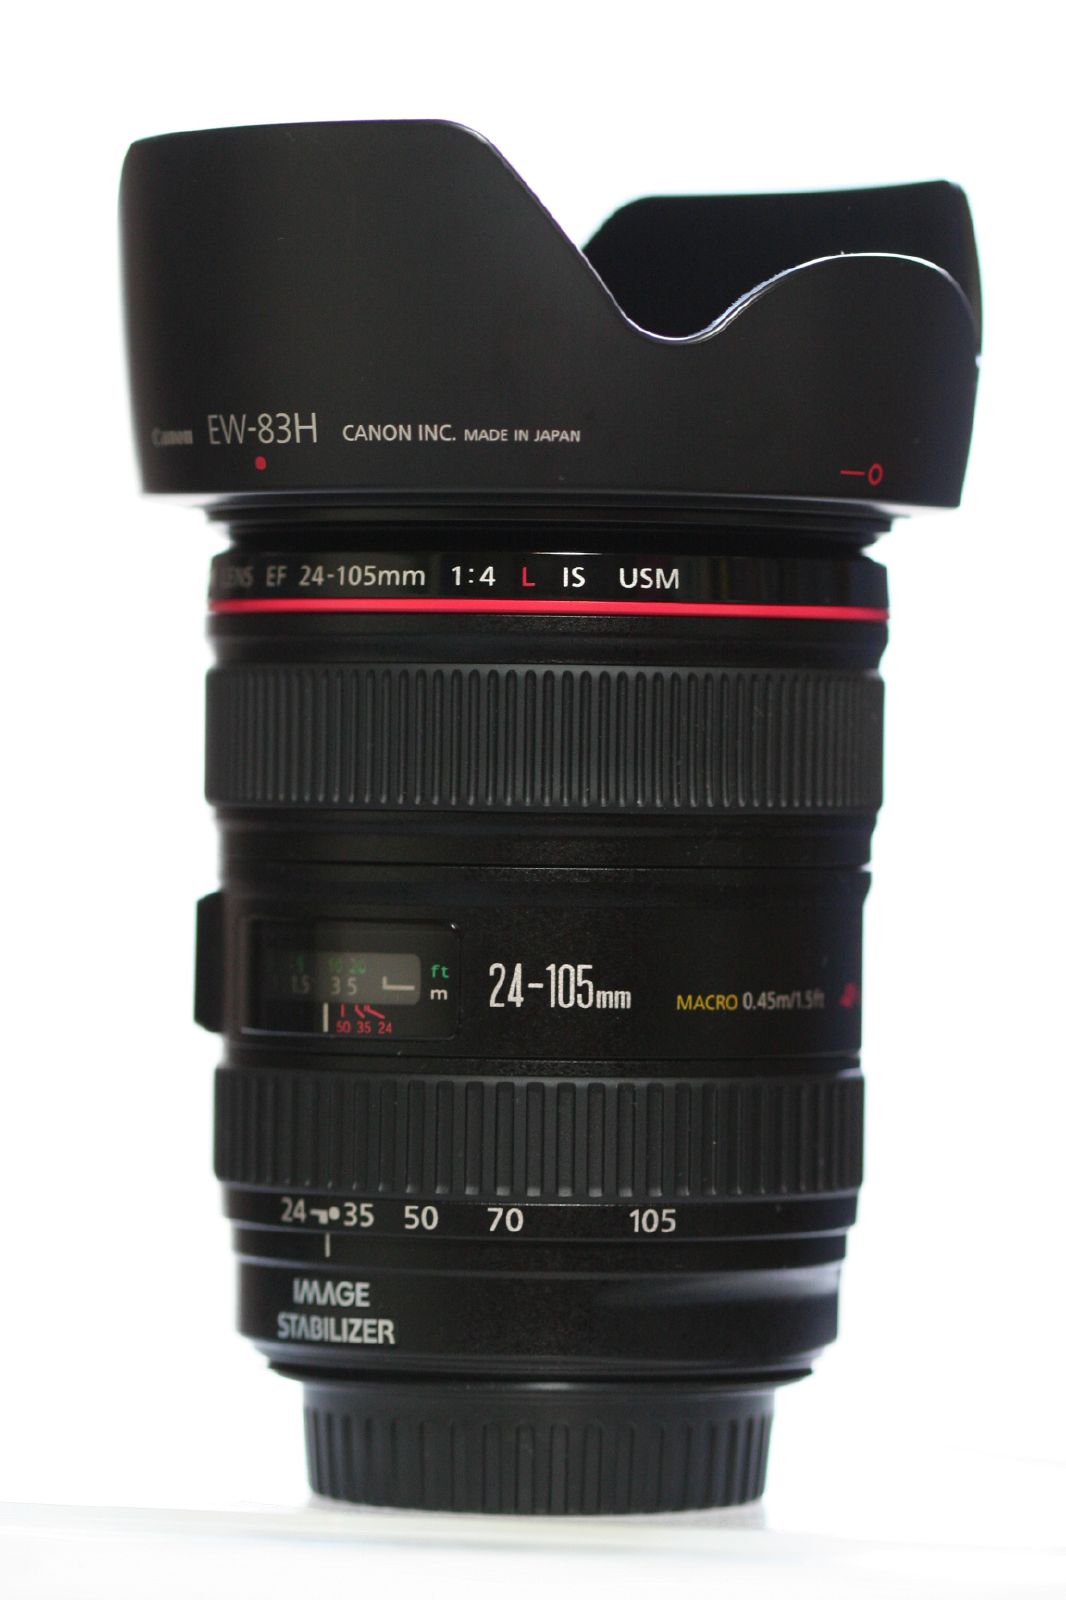 Canon EF 24-105mm f4L IS USM Standard Zoom Lens Technical Specs